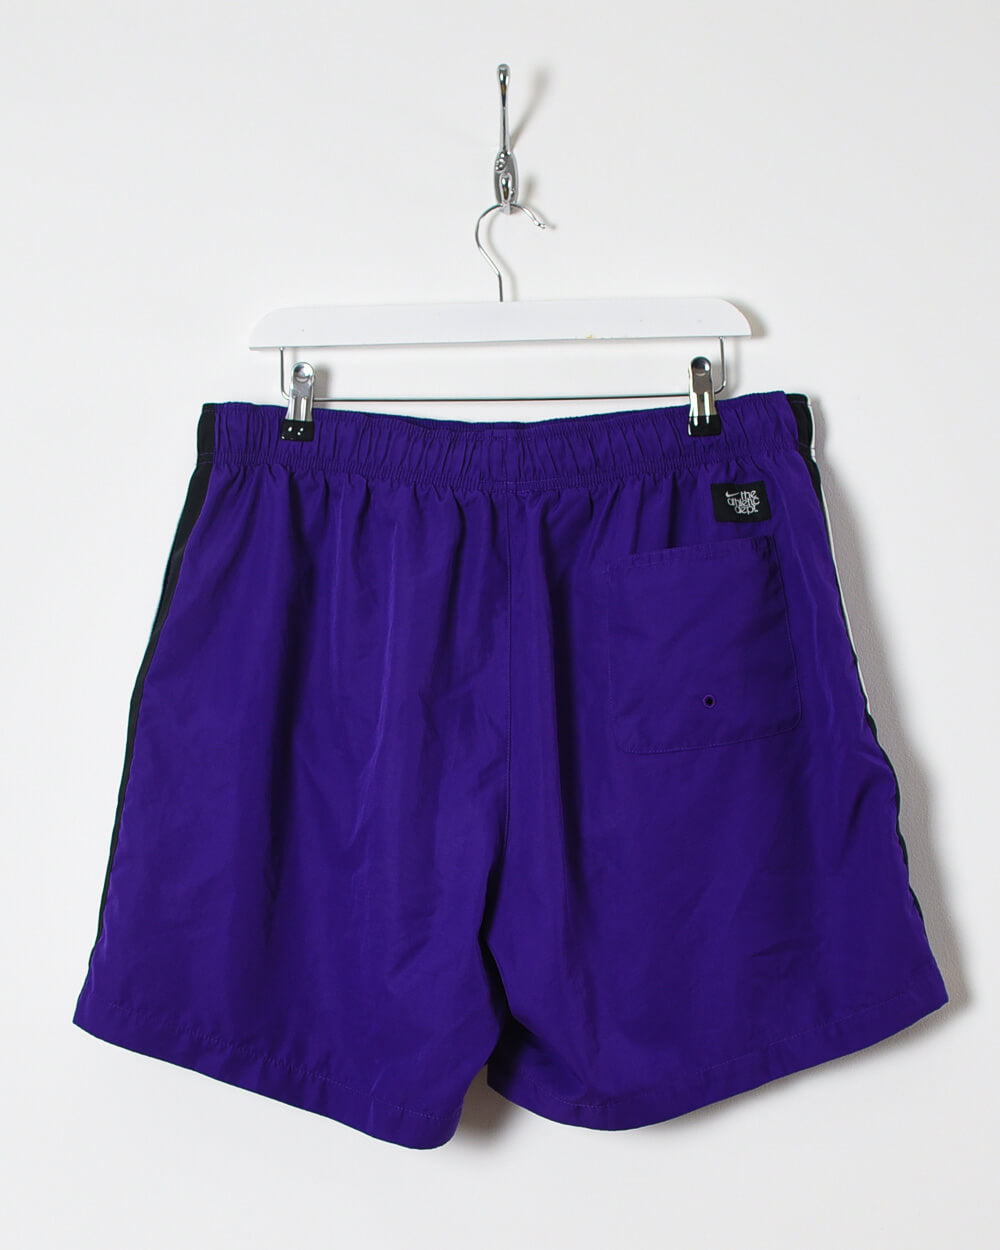 Nike Swimming Shorts - W36 L17 - Domno Vintage 90s, 80s, 00s Retro and Vintage Clothing 